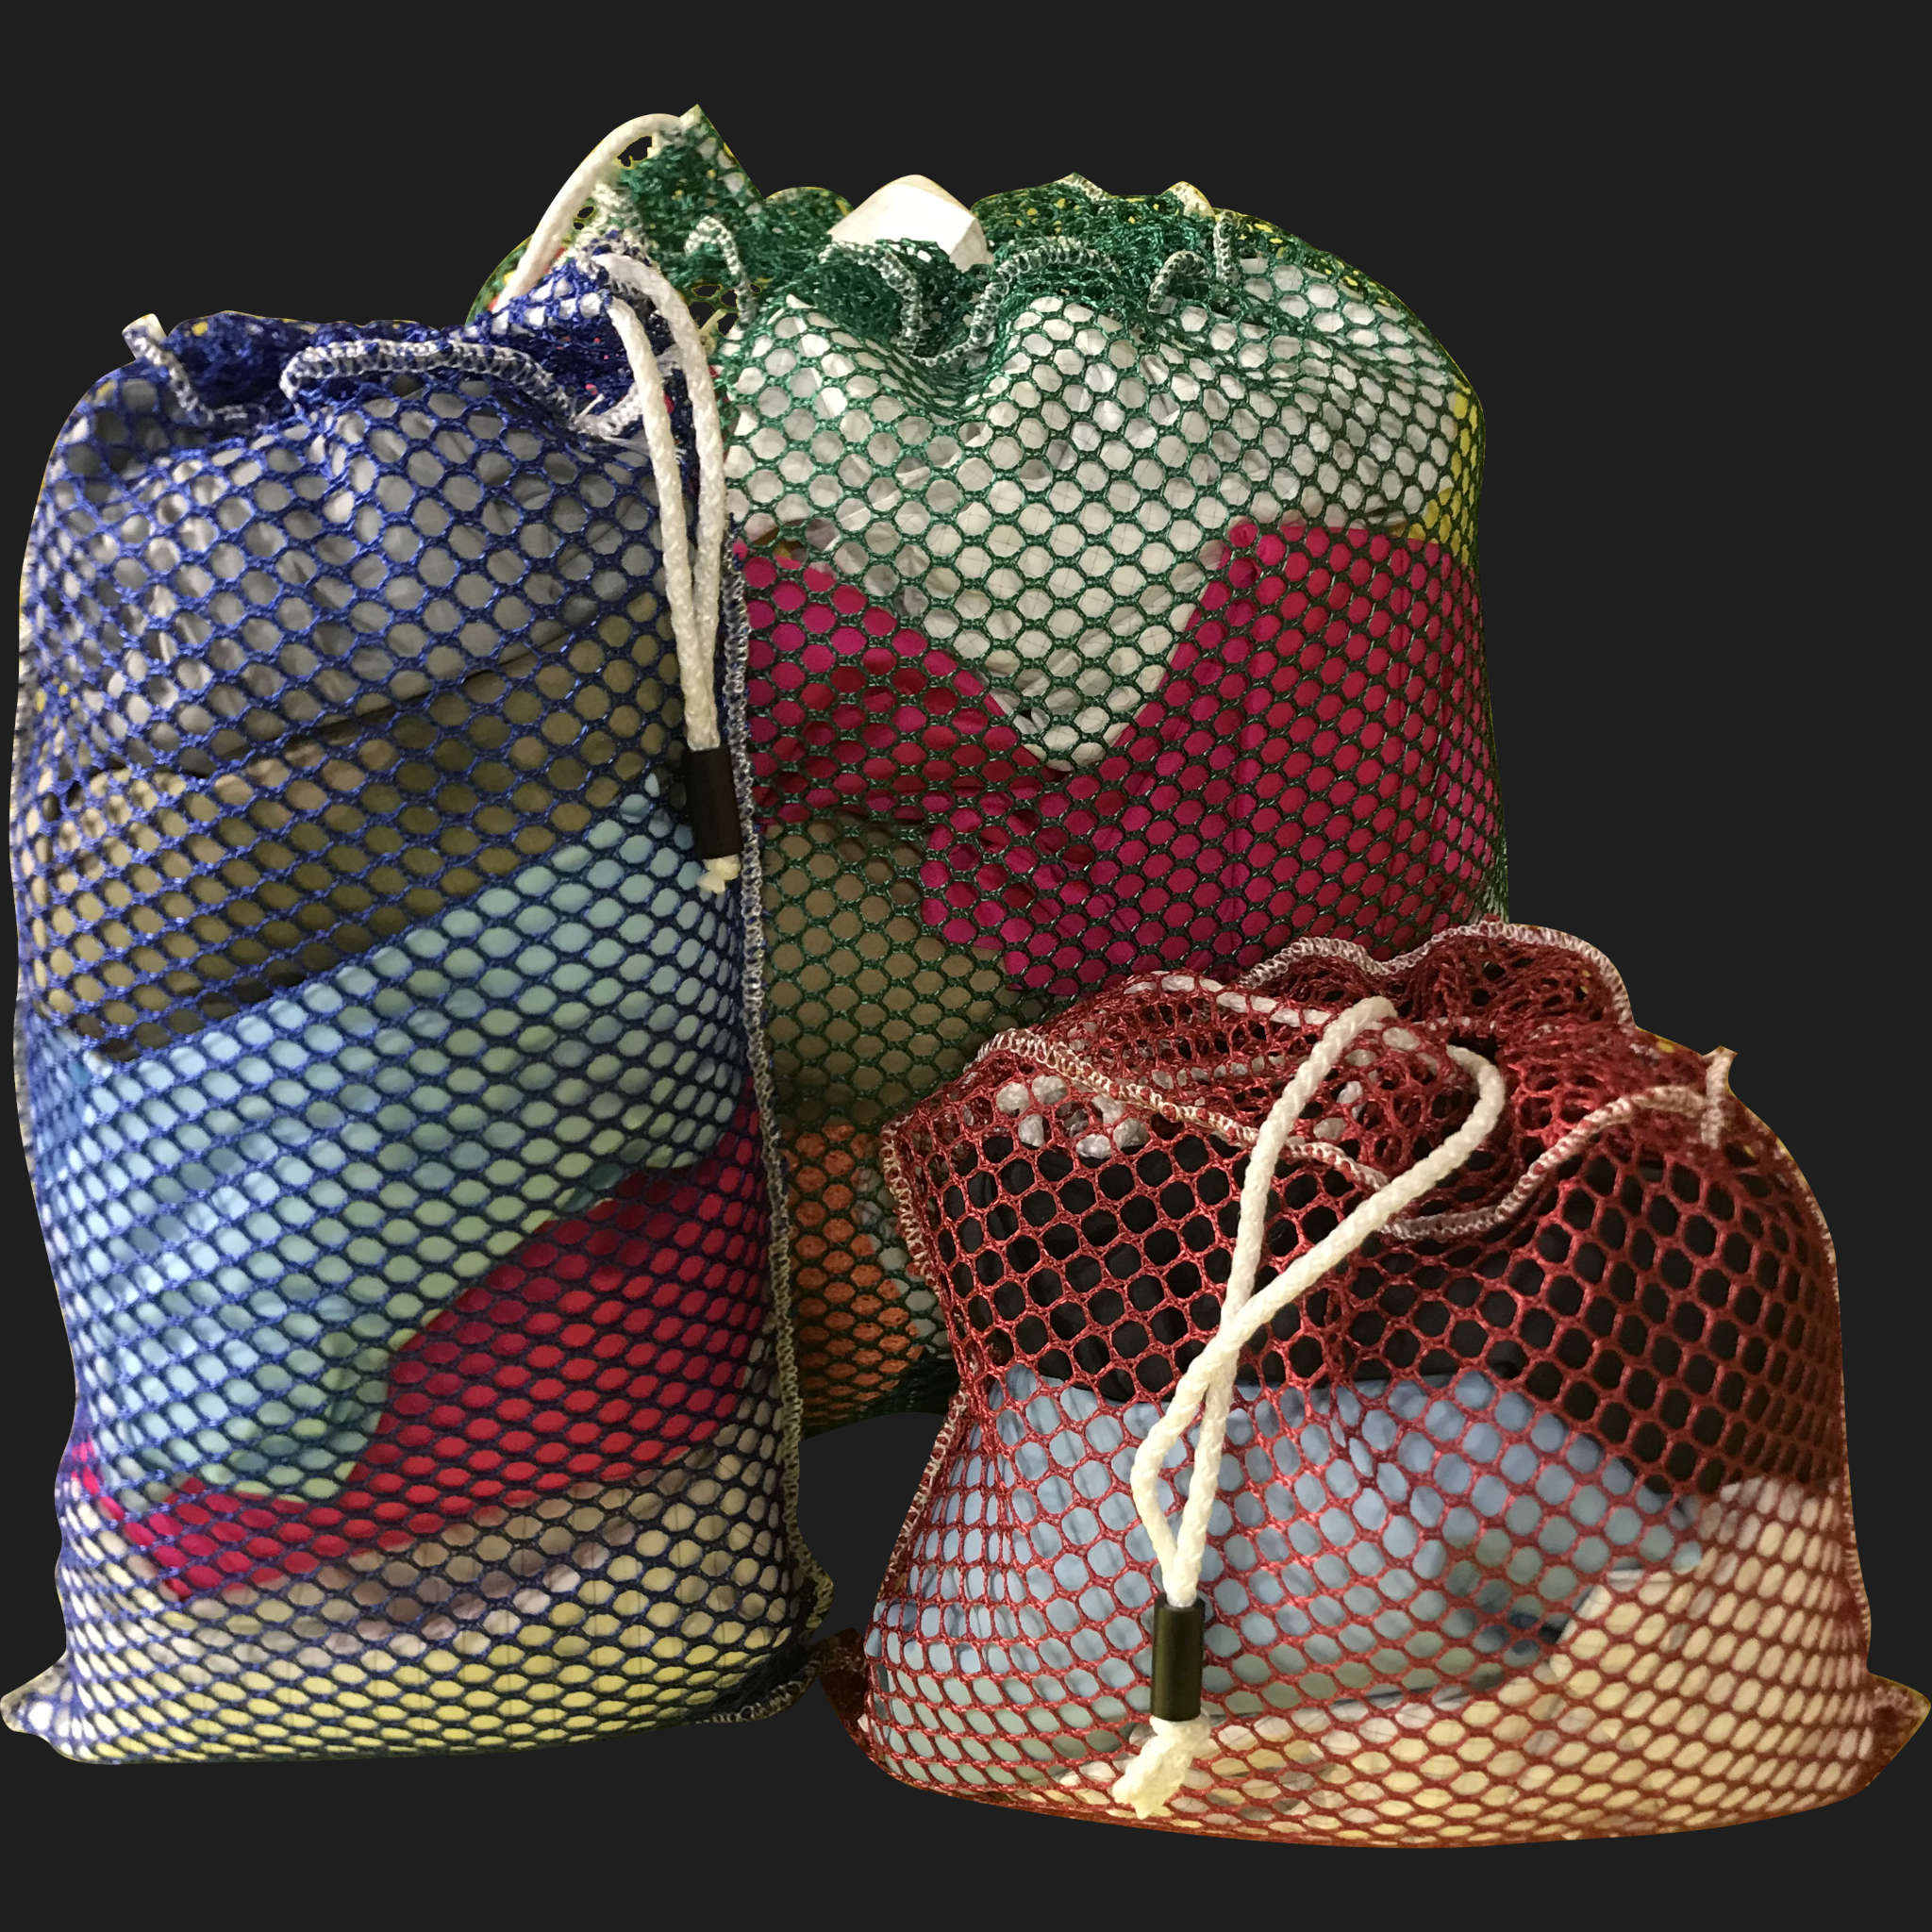 14" x 30" Customized Mesh-Net-Laundry Bags Heavy Duty with Cord and barrellock closure